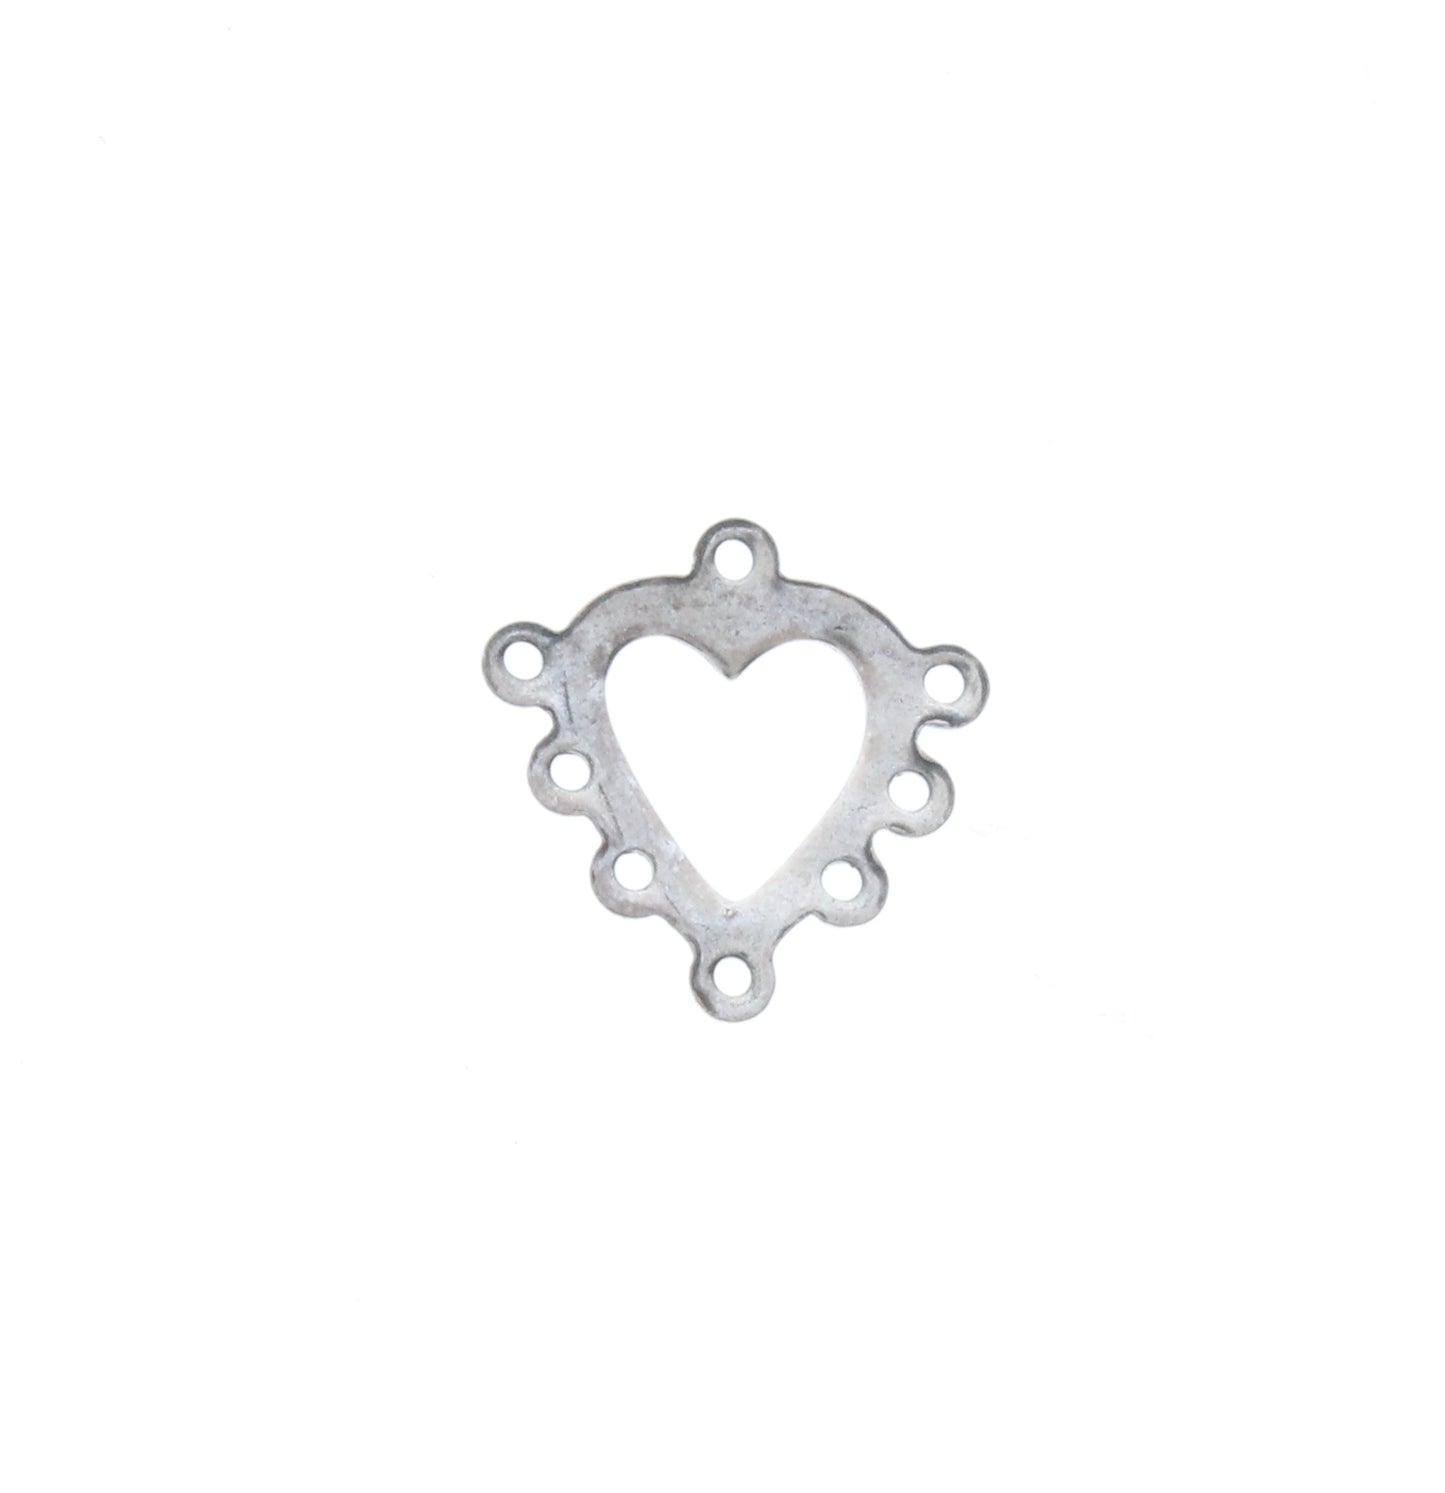 Heart Connector Charms, Vintage Silver, Pack of 6